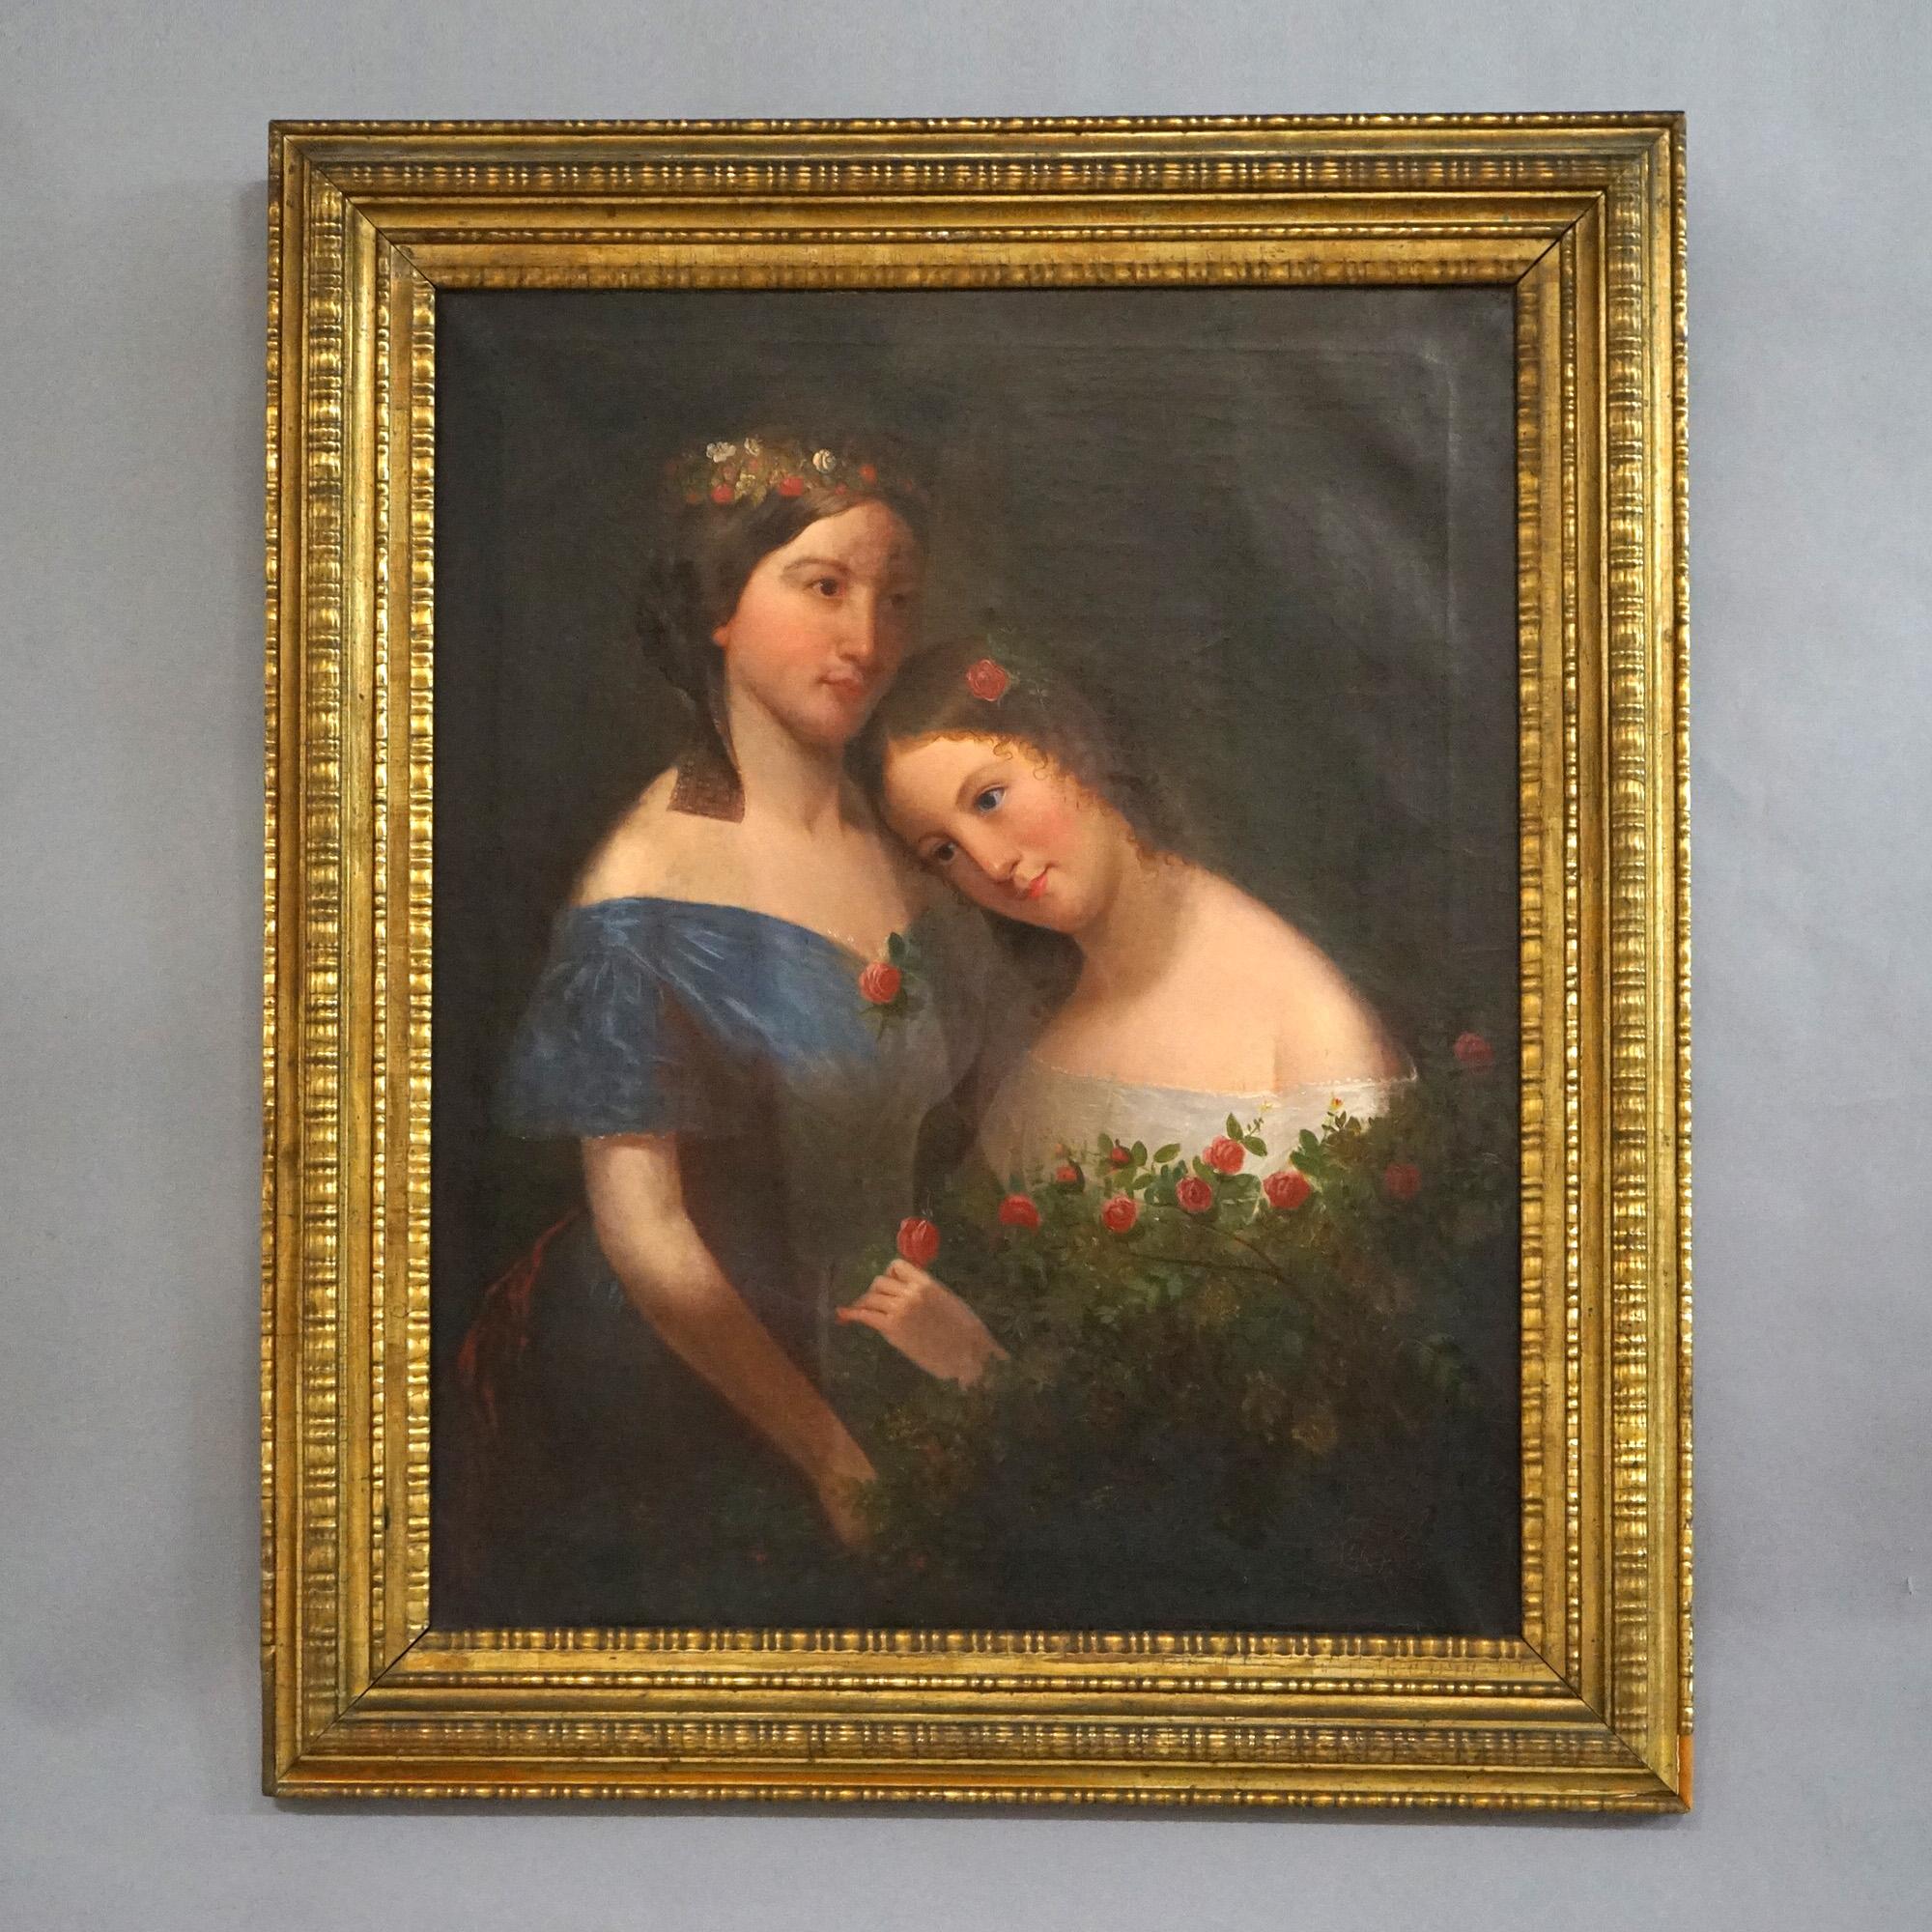 Antique Double Portrait Oil Painting with Roses & Original Giltwood Frame c1840 In Good Condition For Sale In Big Flats, NY